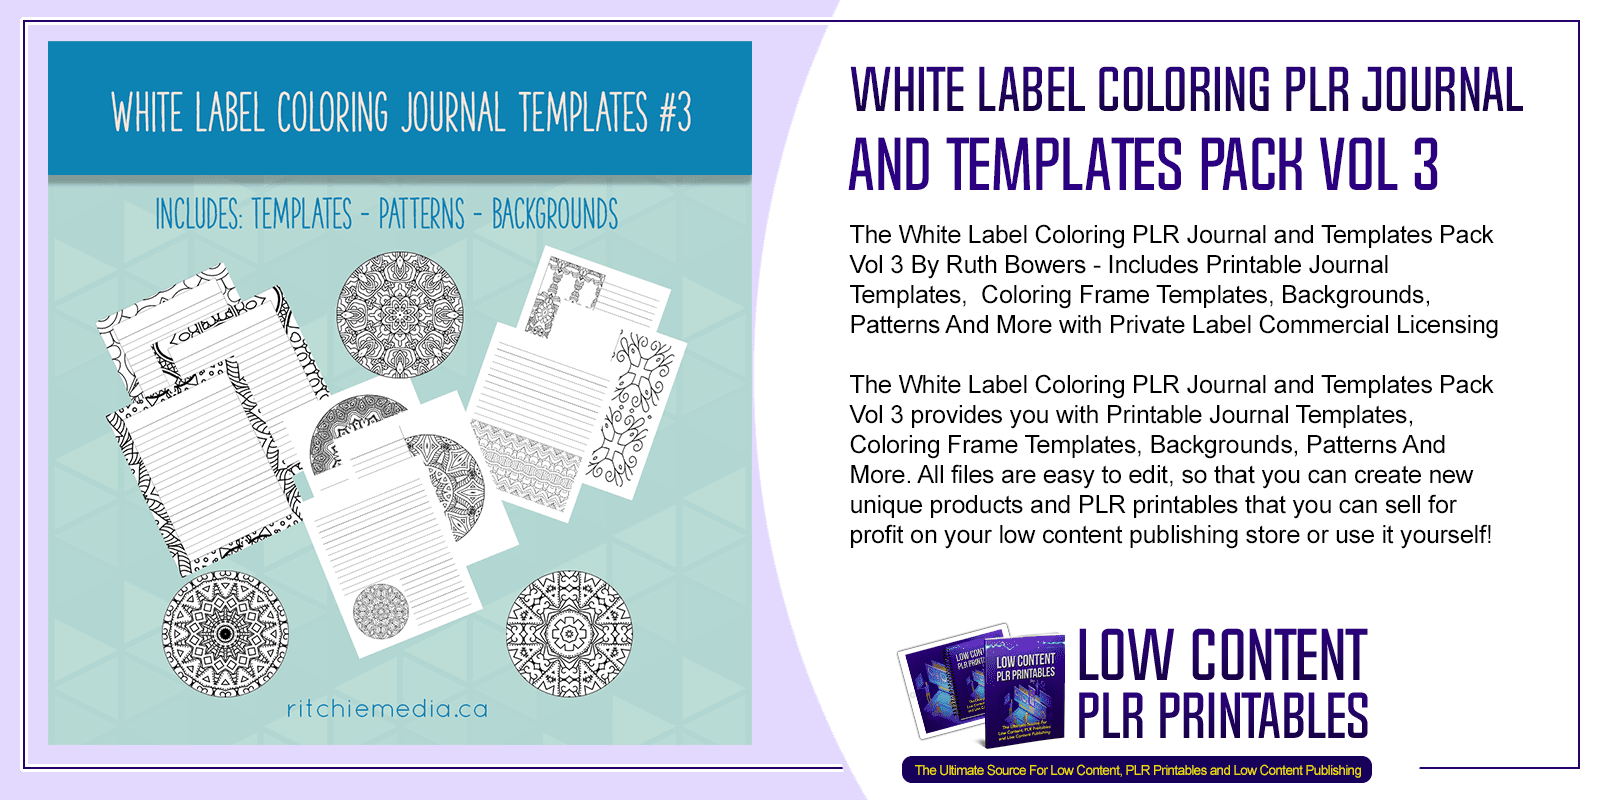 White Label Coloring PLR Journal and Templates Pack Vol 3